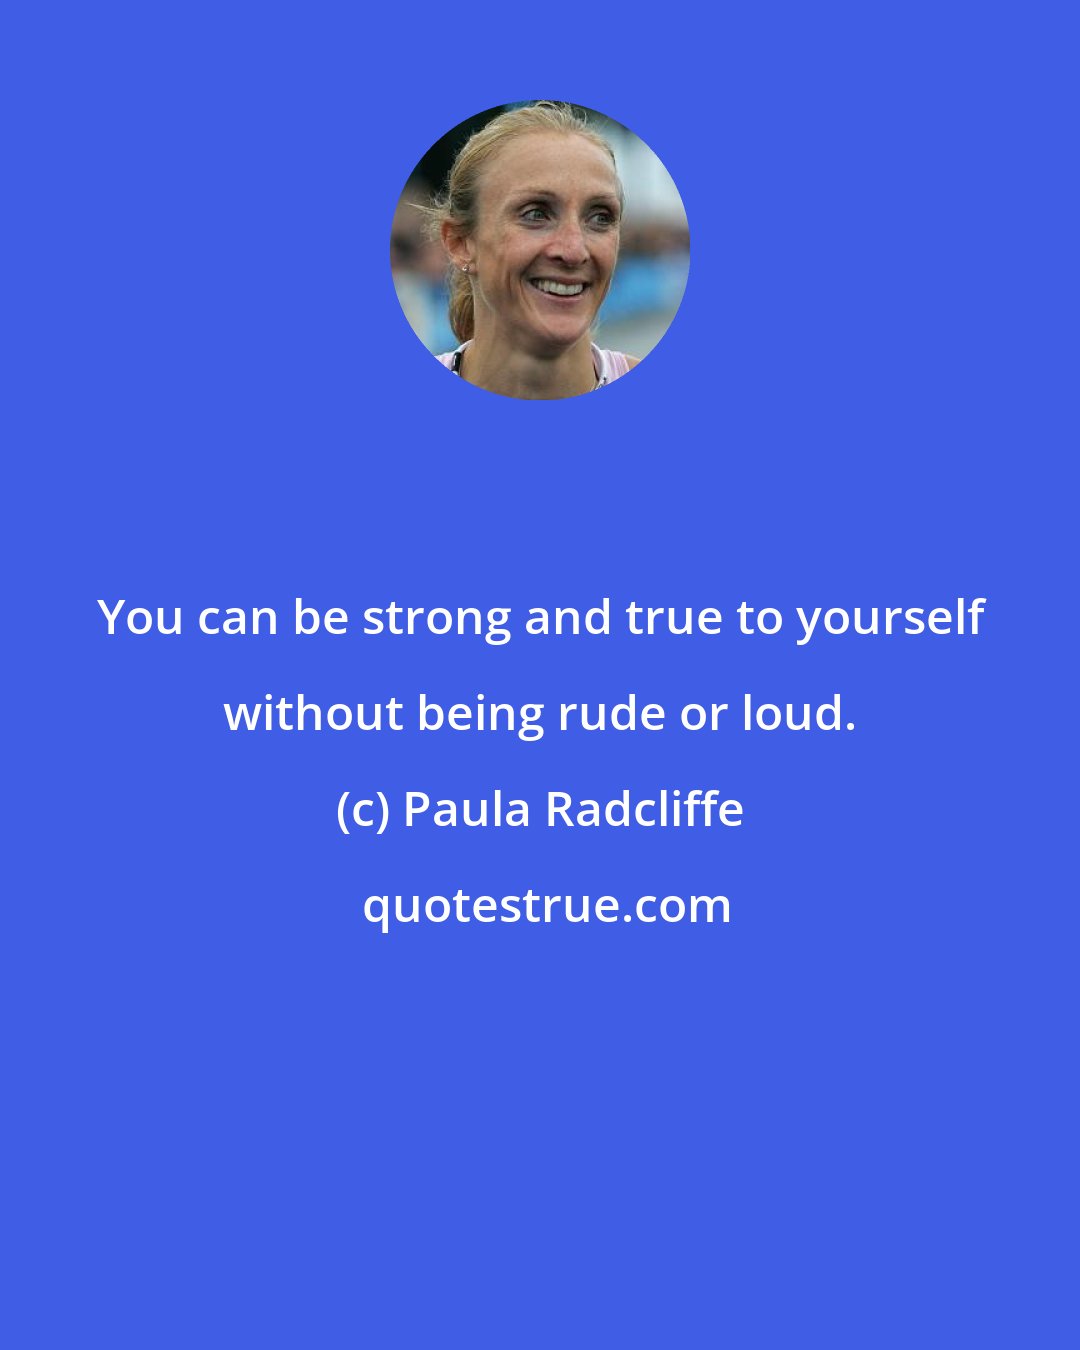 Paula Radcliffe: You can be strong and true to yourself without being rude or loud.